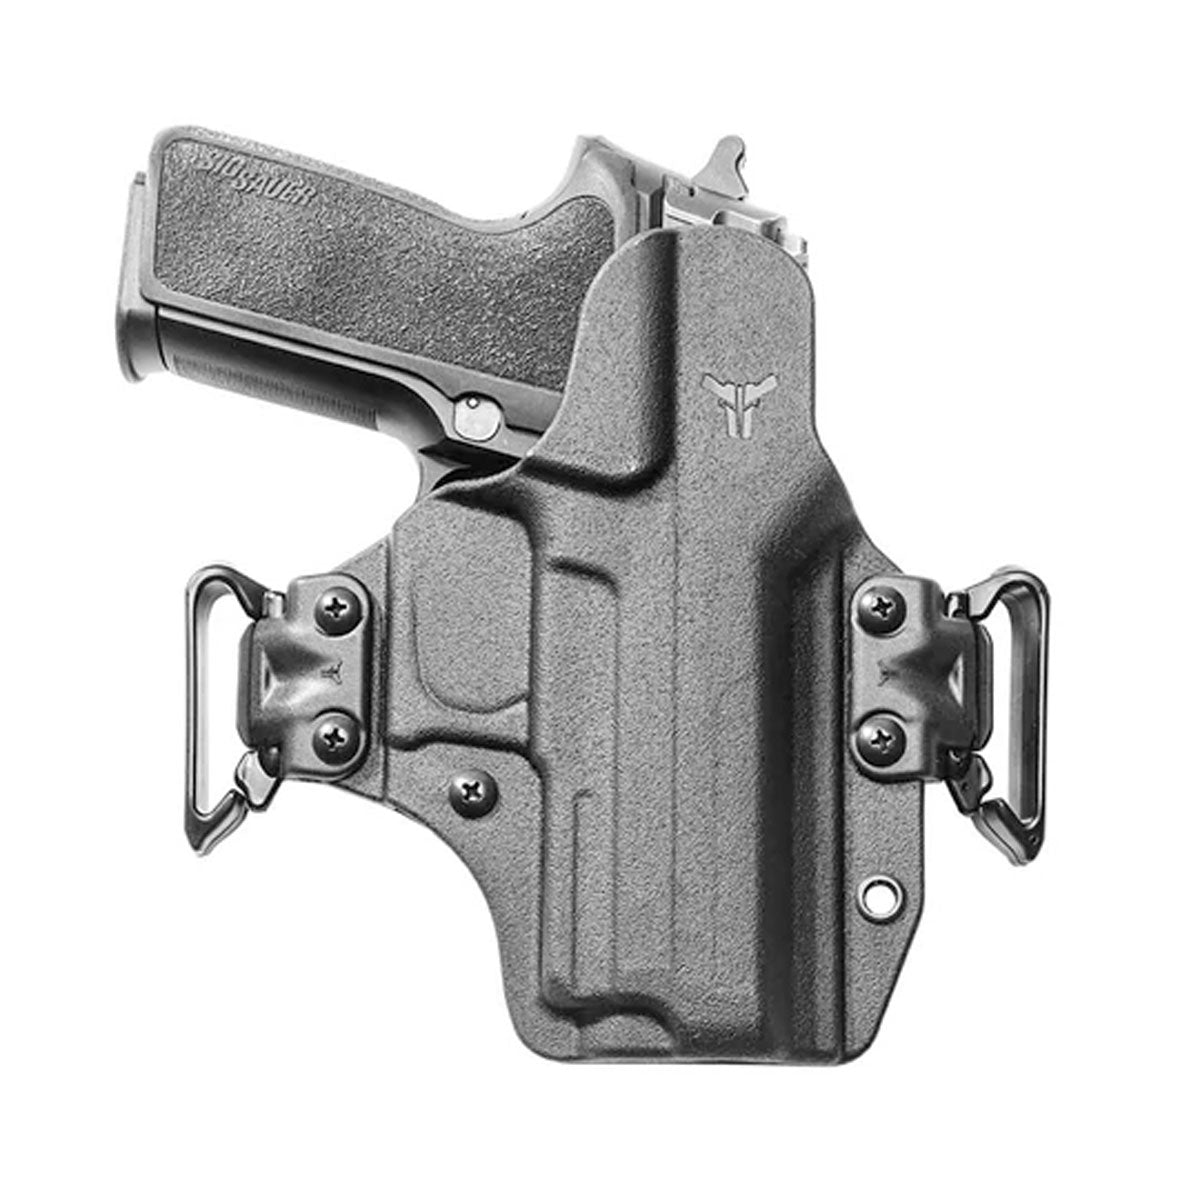 Blade-Tech Total Eclipse 2.0 Modular Holster Holsters Blade-Tech Holsters Sig - P228 / P229 Tactical Gear Supplier Tactical Distributors Australia